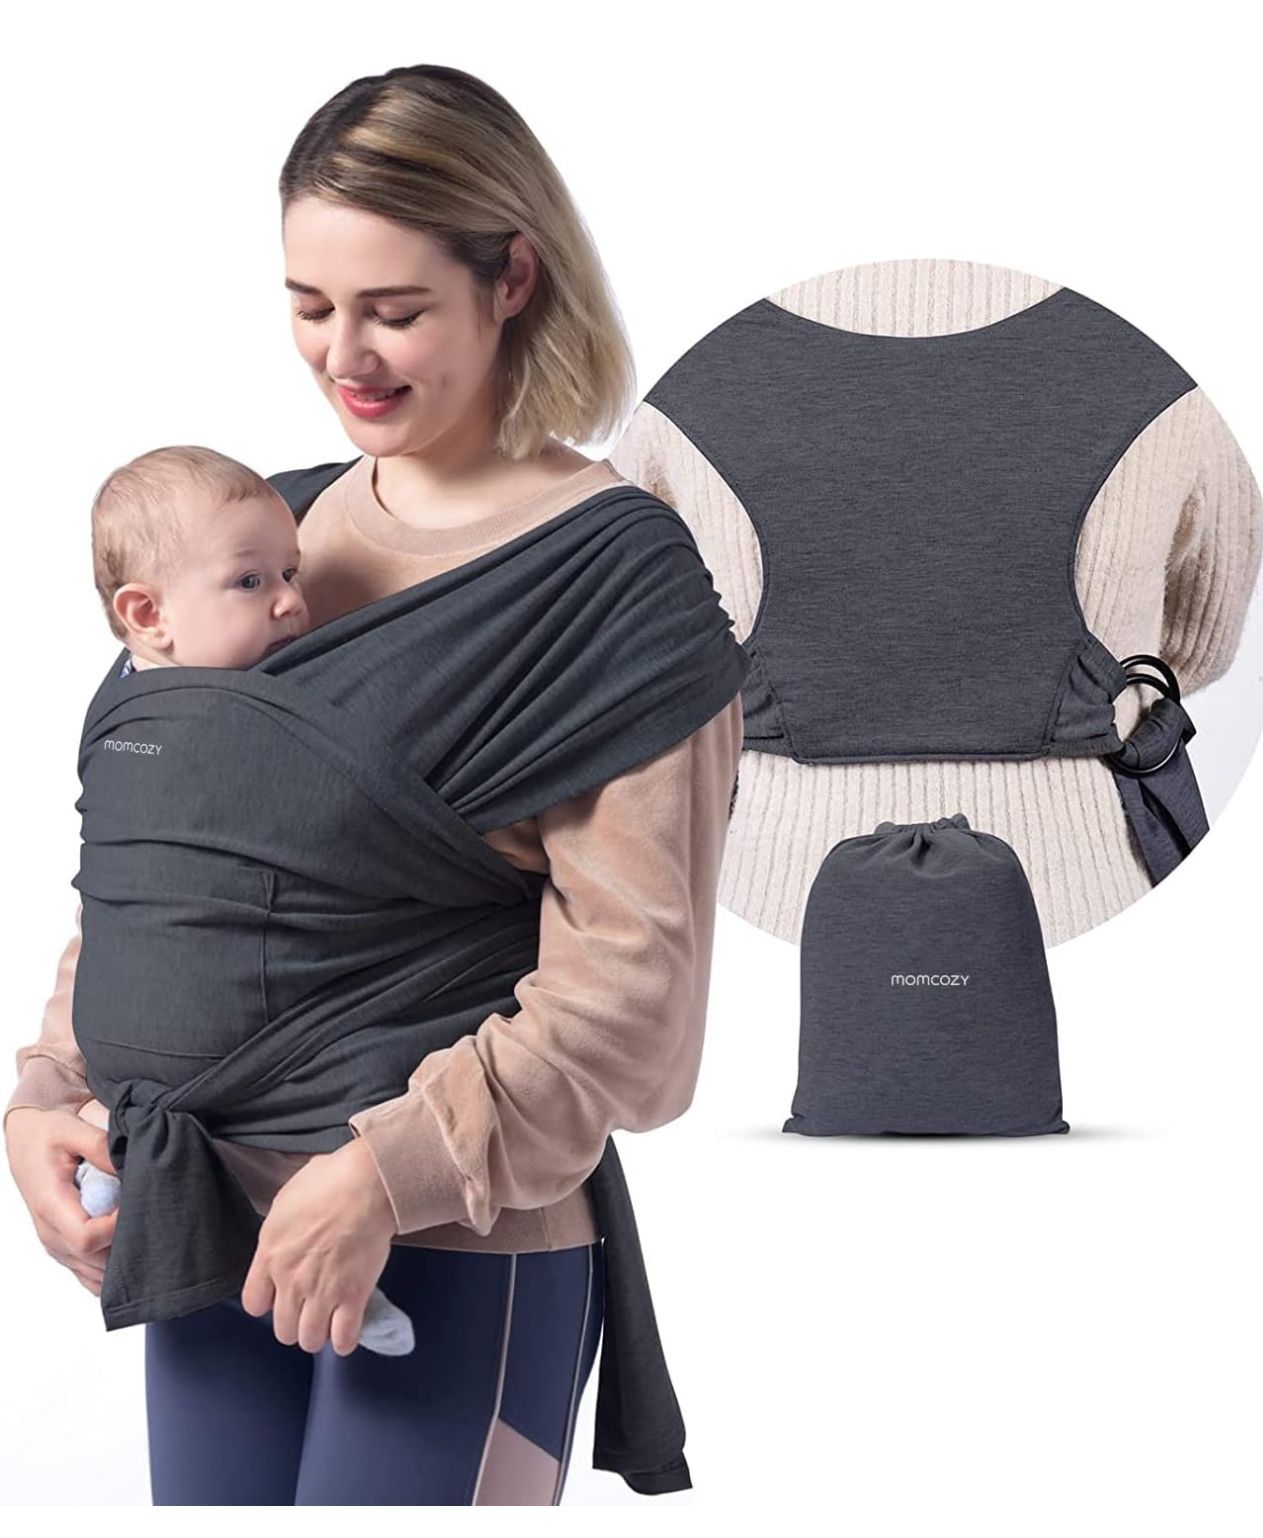 Momcozy Baby Wrap Carrier, Easy to Wear Infant Carrier Slings, Lightweight Hands Free Baby Sling, Adjustable Baby Carriers for Newborn to Toddler 8-35